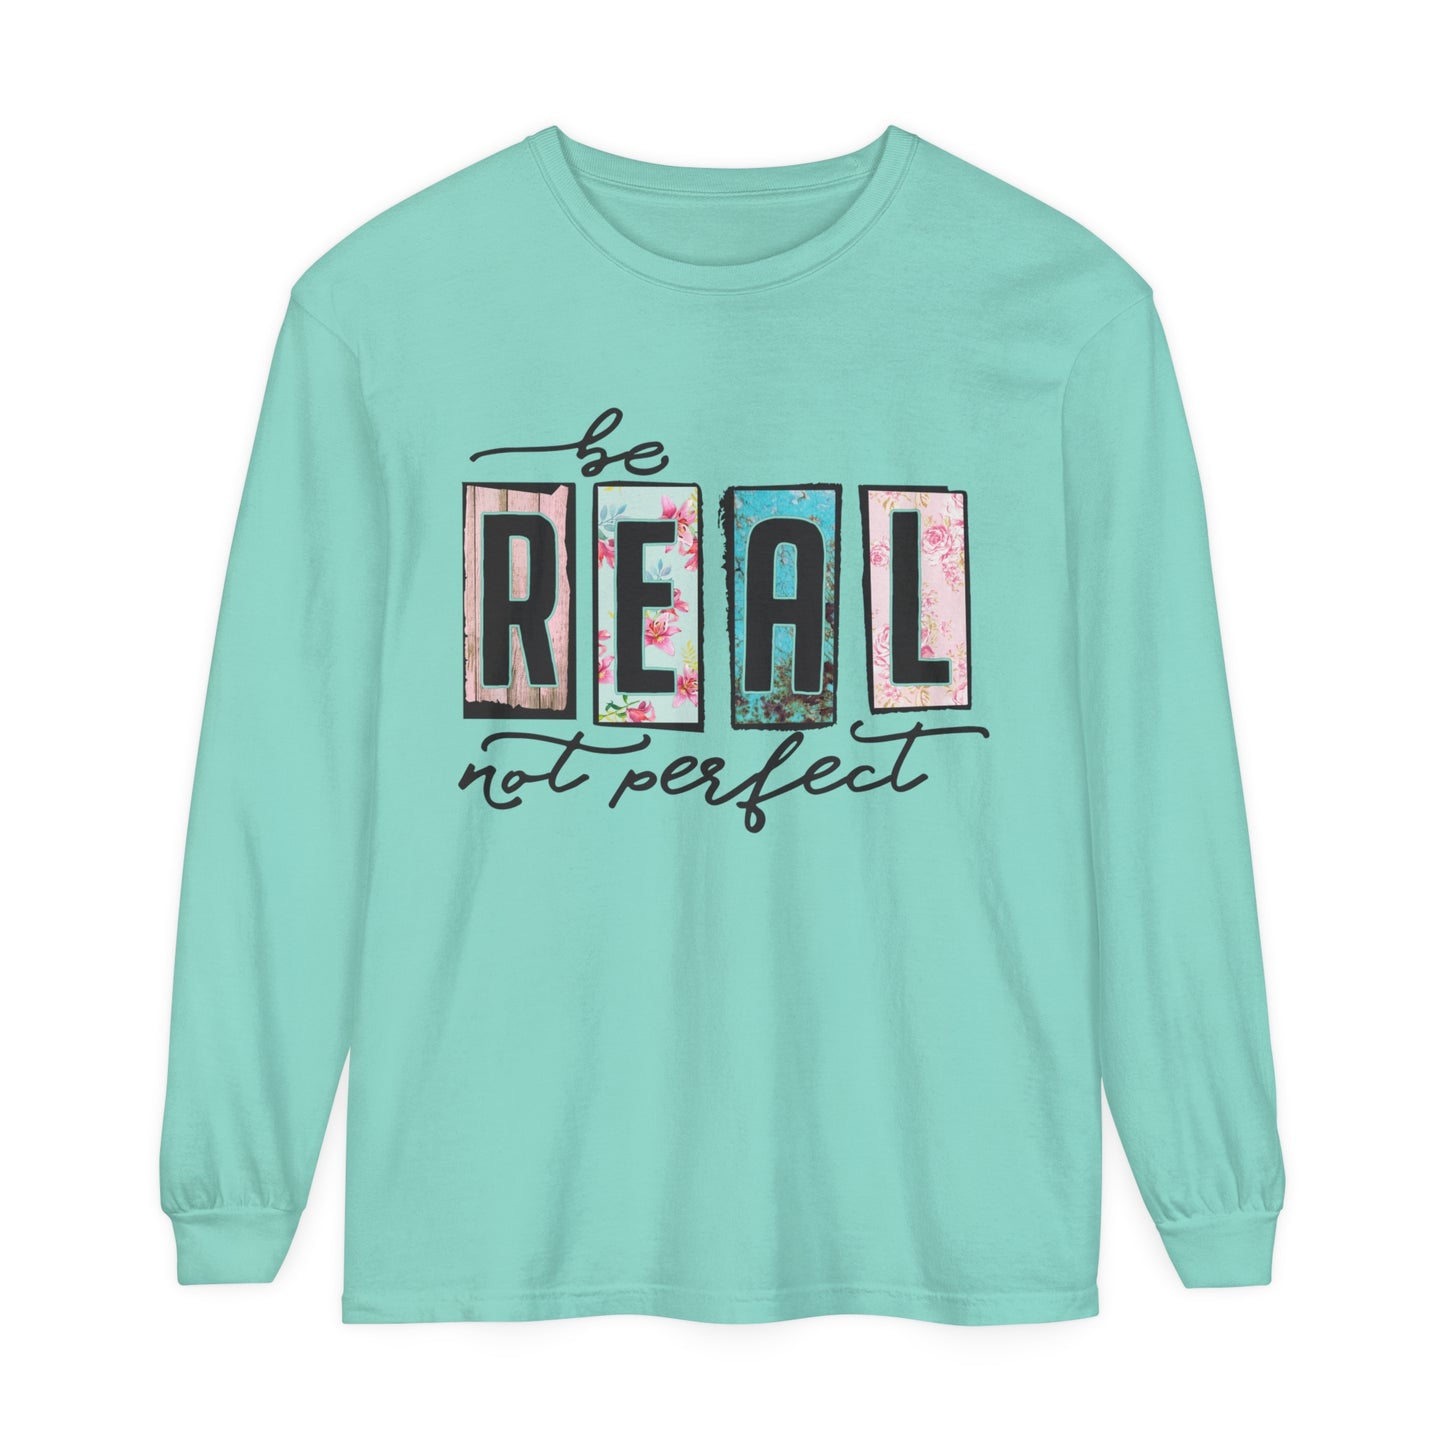 Be Real Not Perfect Women's Loose Long Sleeve T-Shirt